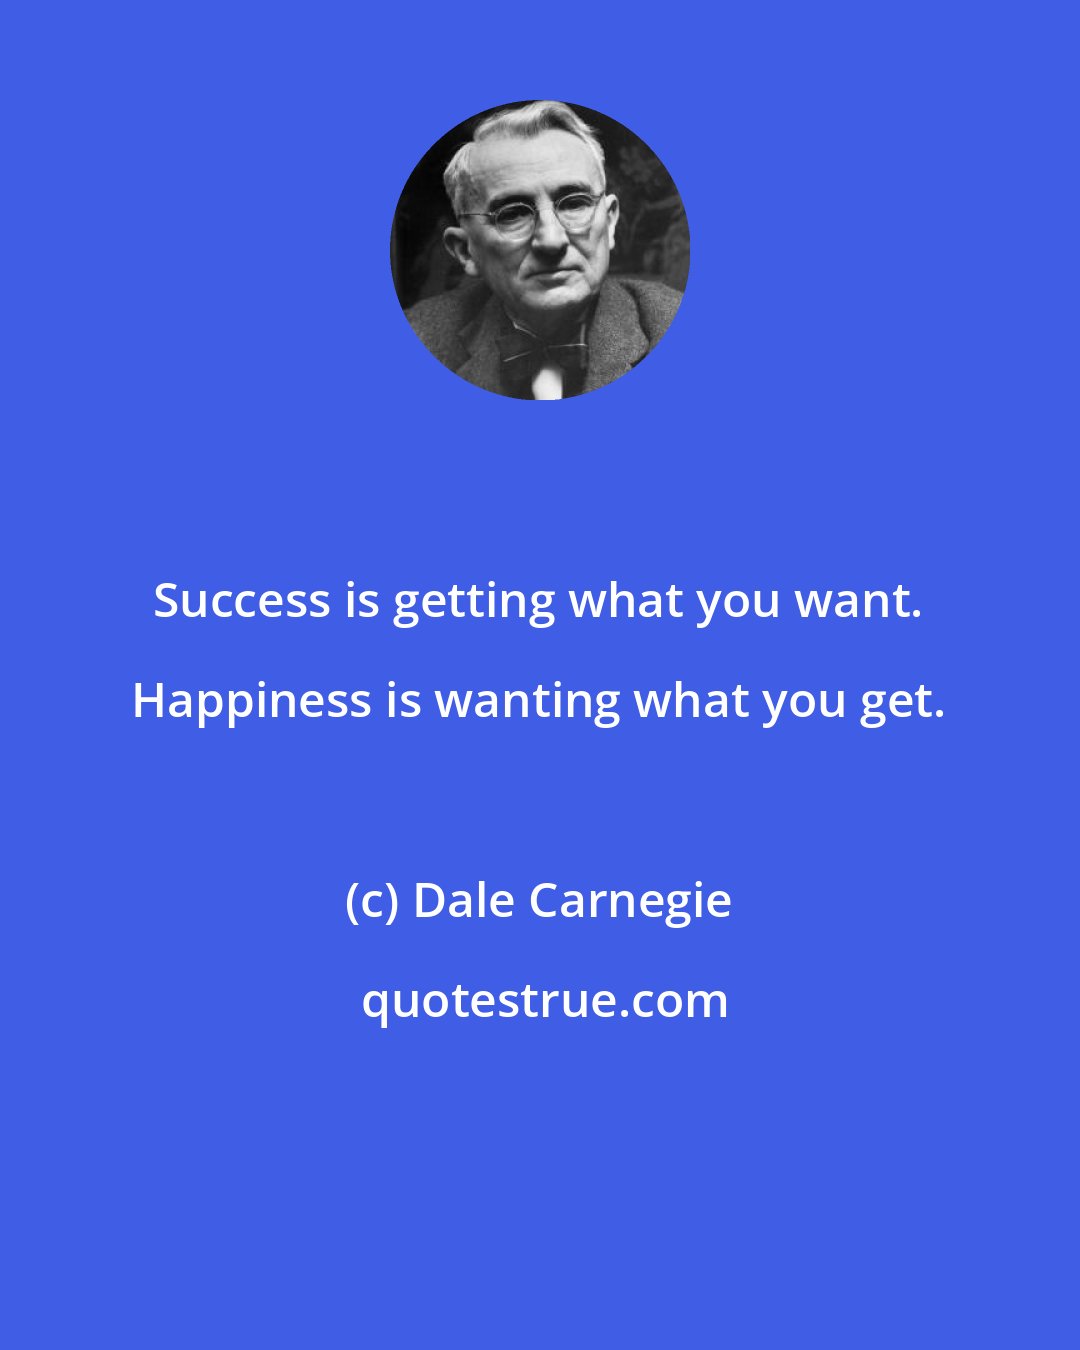 Dale Carnegie: Success is getting what you want. Happiness is wanting what you get.